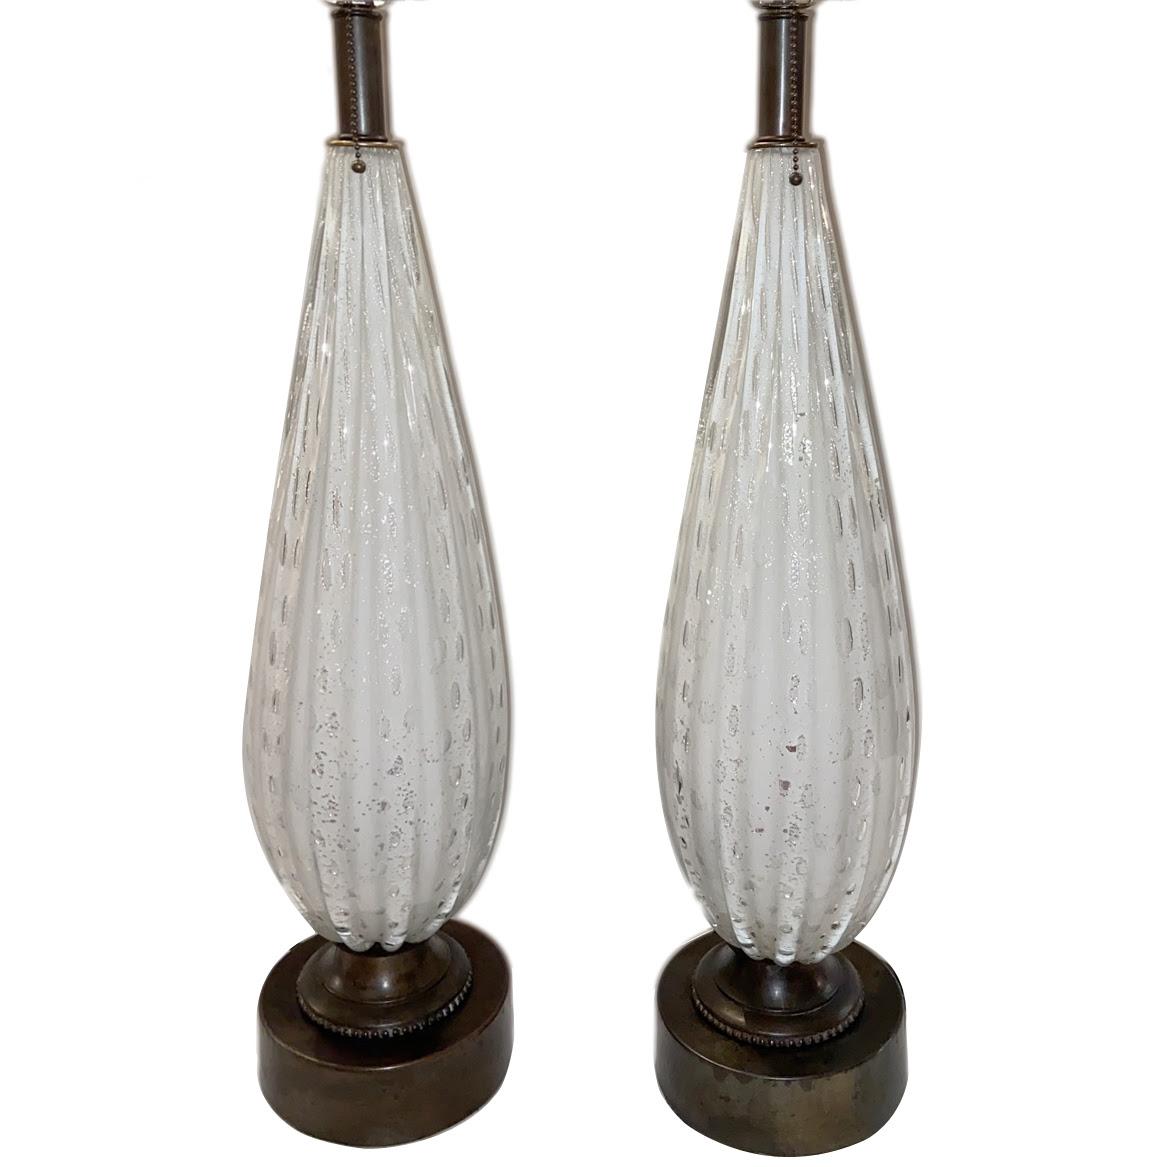 Pair of Murano Glass Lamps In Good Condition For Sale In Sag Harbor, NY